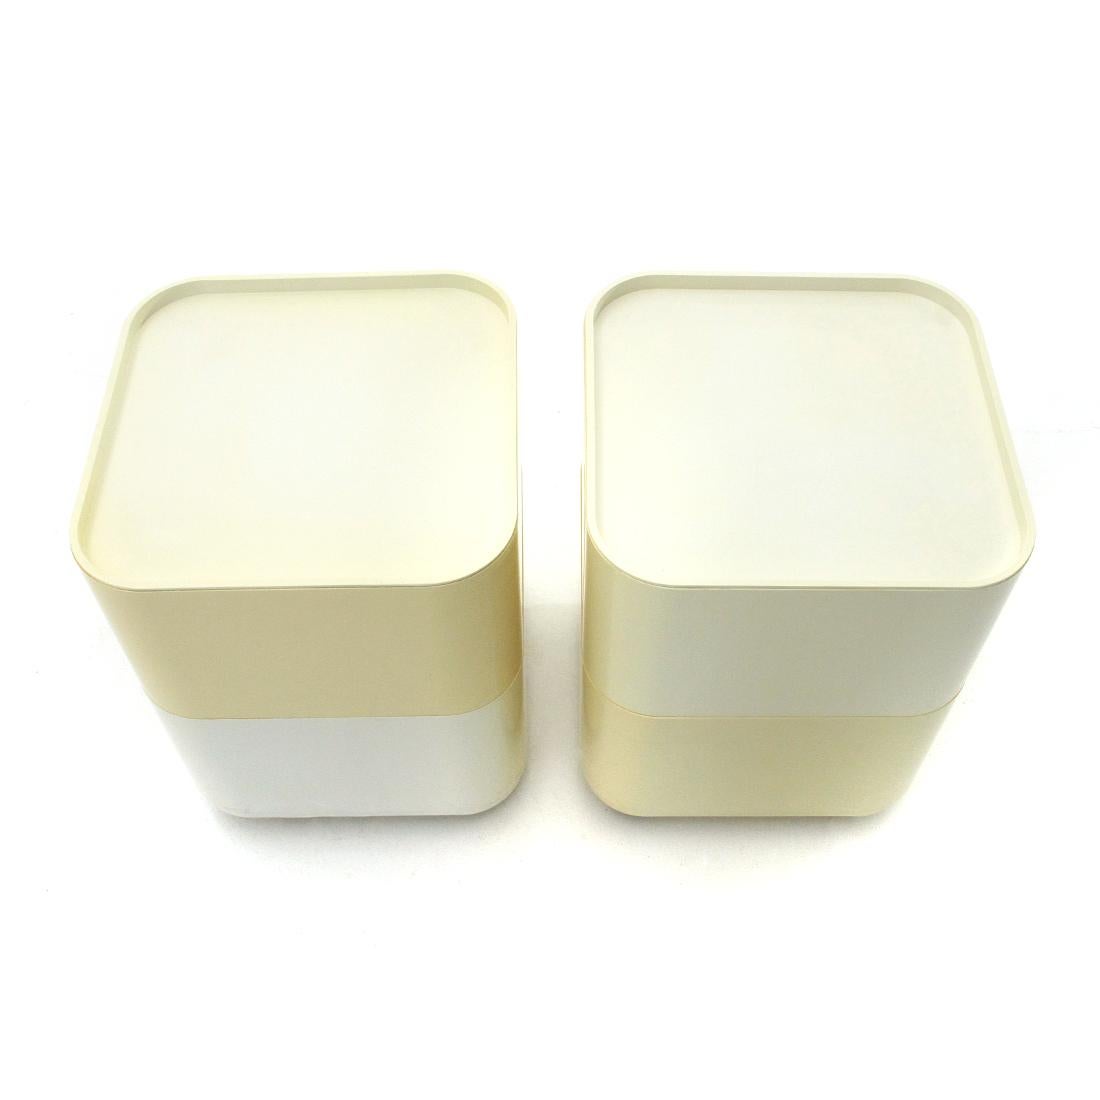 Plastic Pair of Square Componibili Containers by Anna Castelli Ferrieri for Kartell 1970